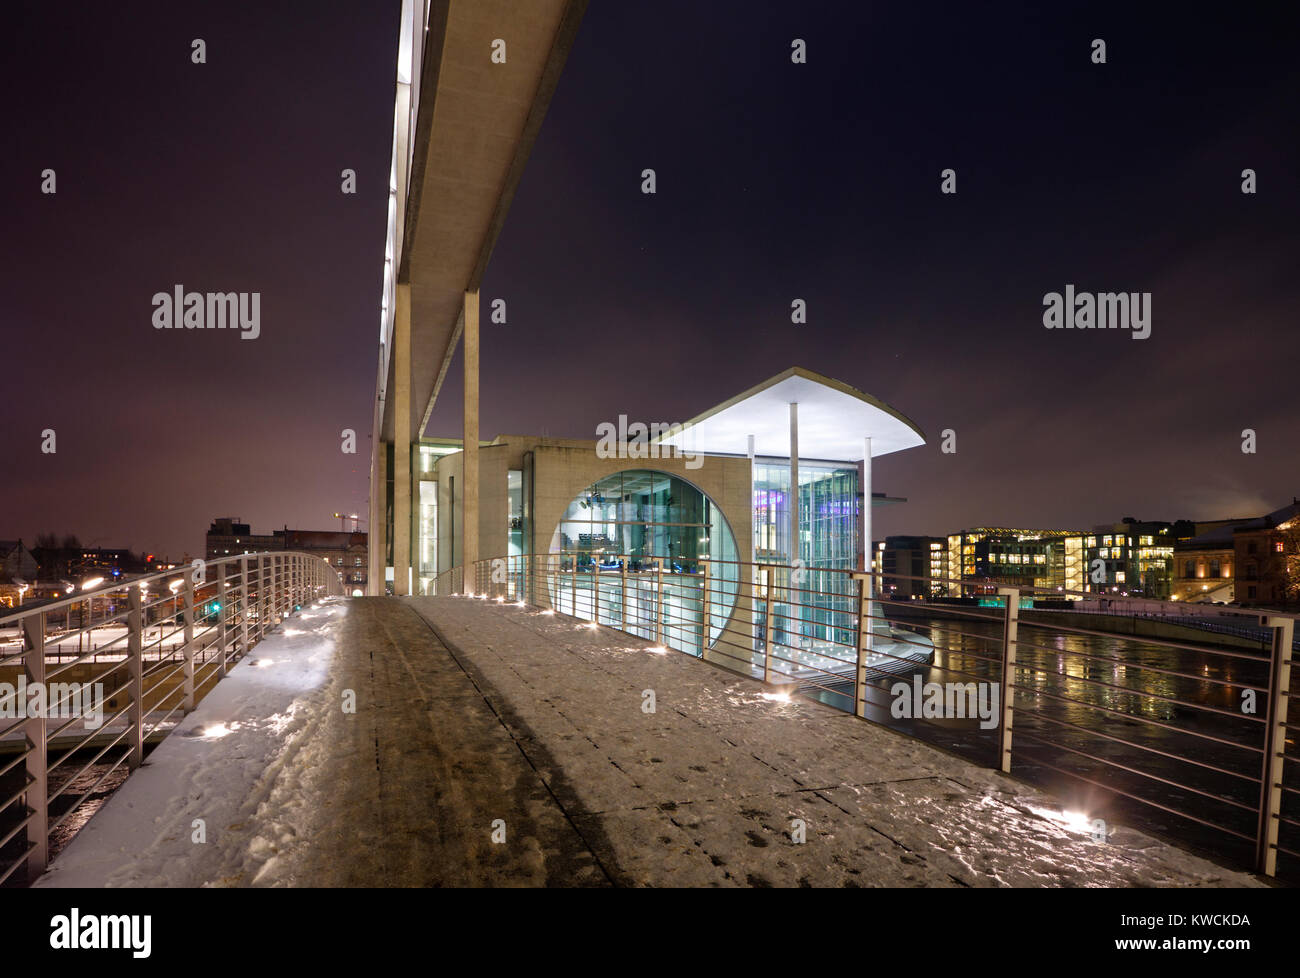 Modern architecture in the government district of Berlin. Winter night shot. Stock Photo